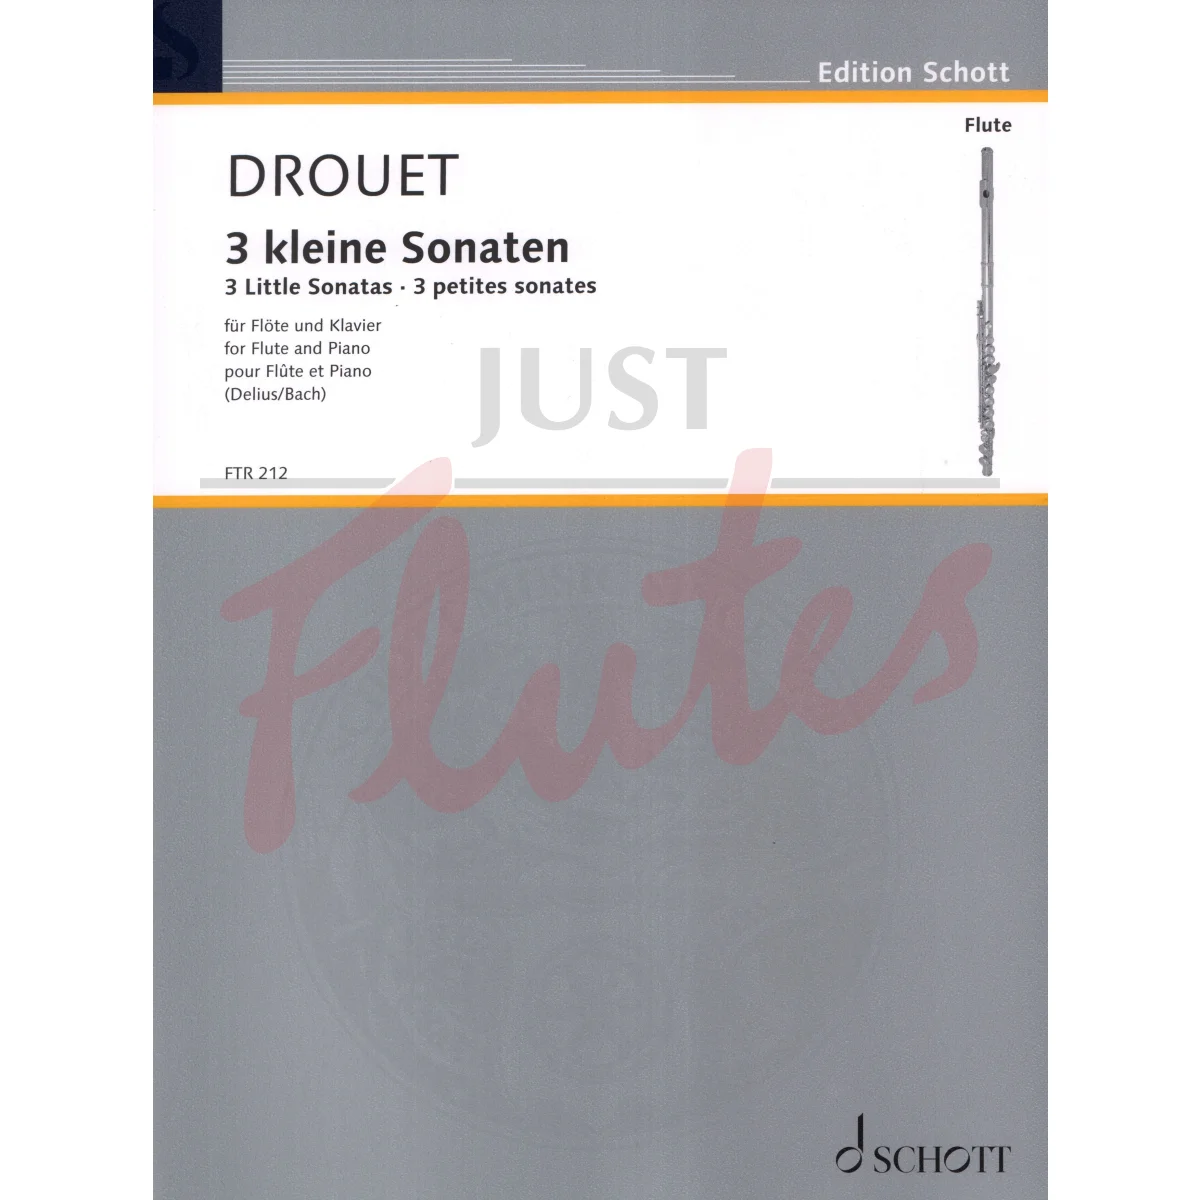 Three Little Sonatas for Flute and Piano